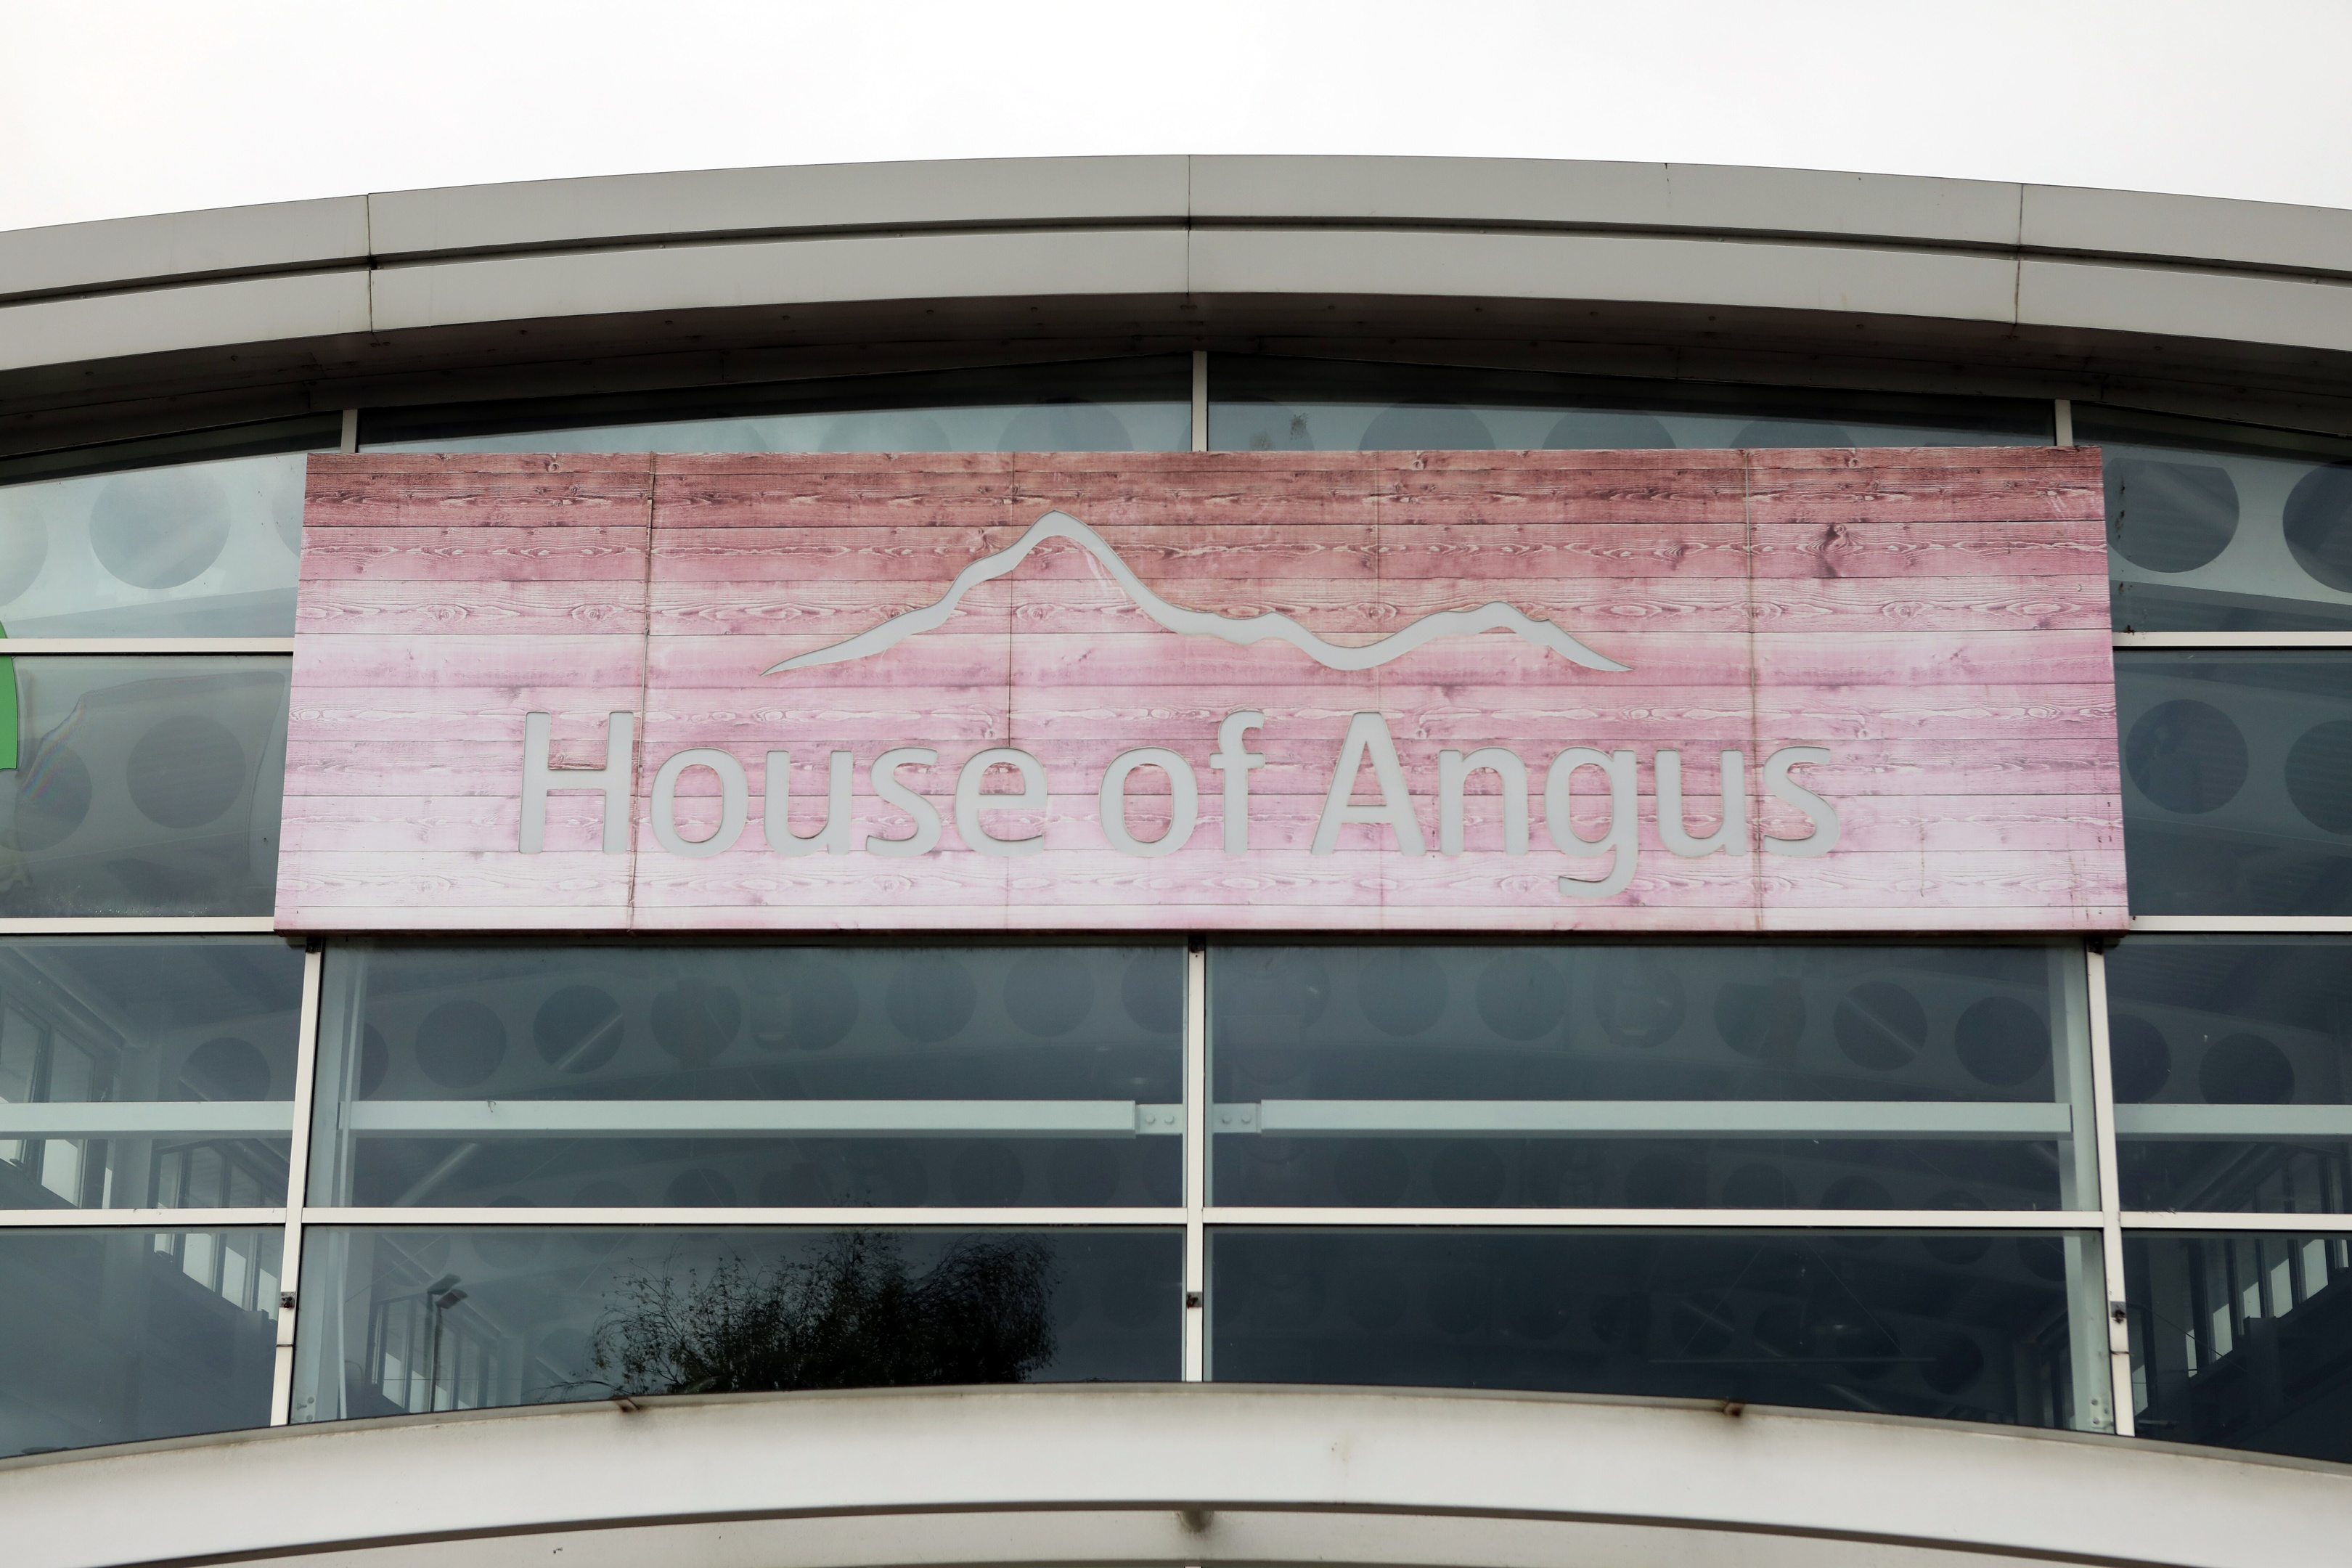 The House of Angus unit.